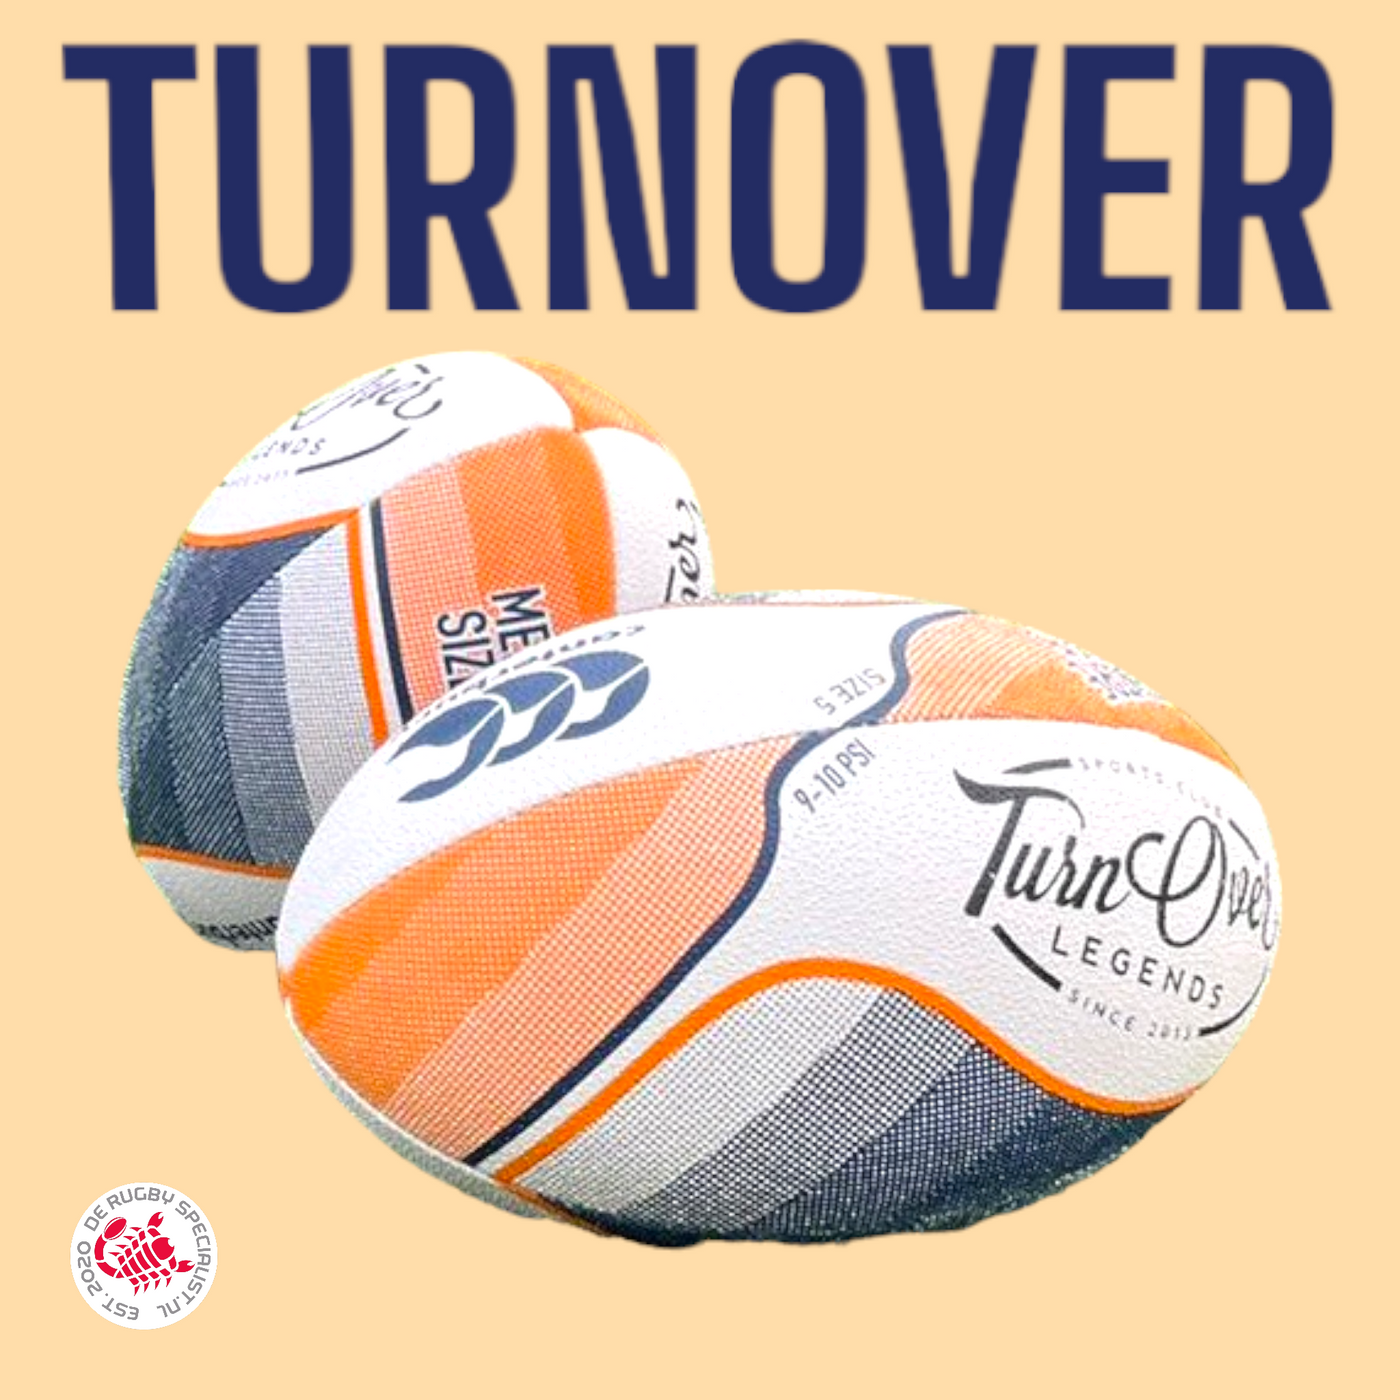 PRE-ORDER: SUPPORT BAL TURNOVER